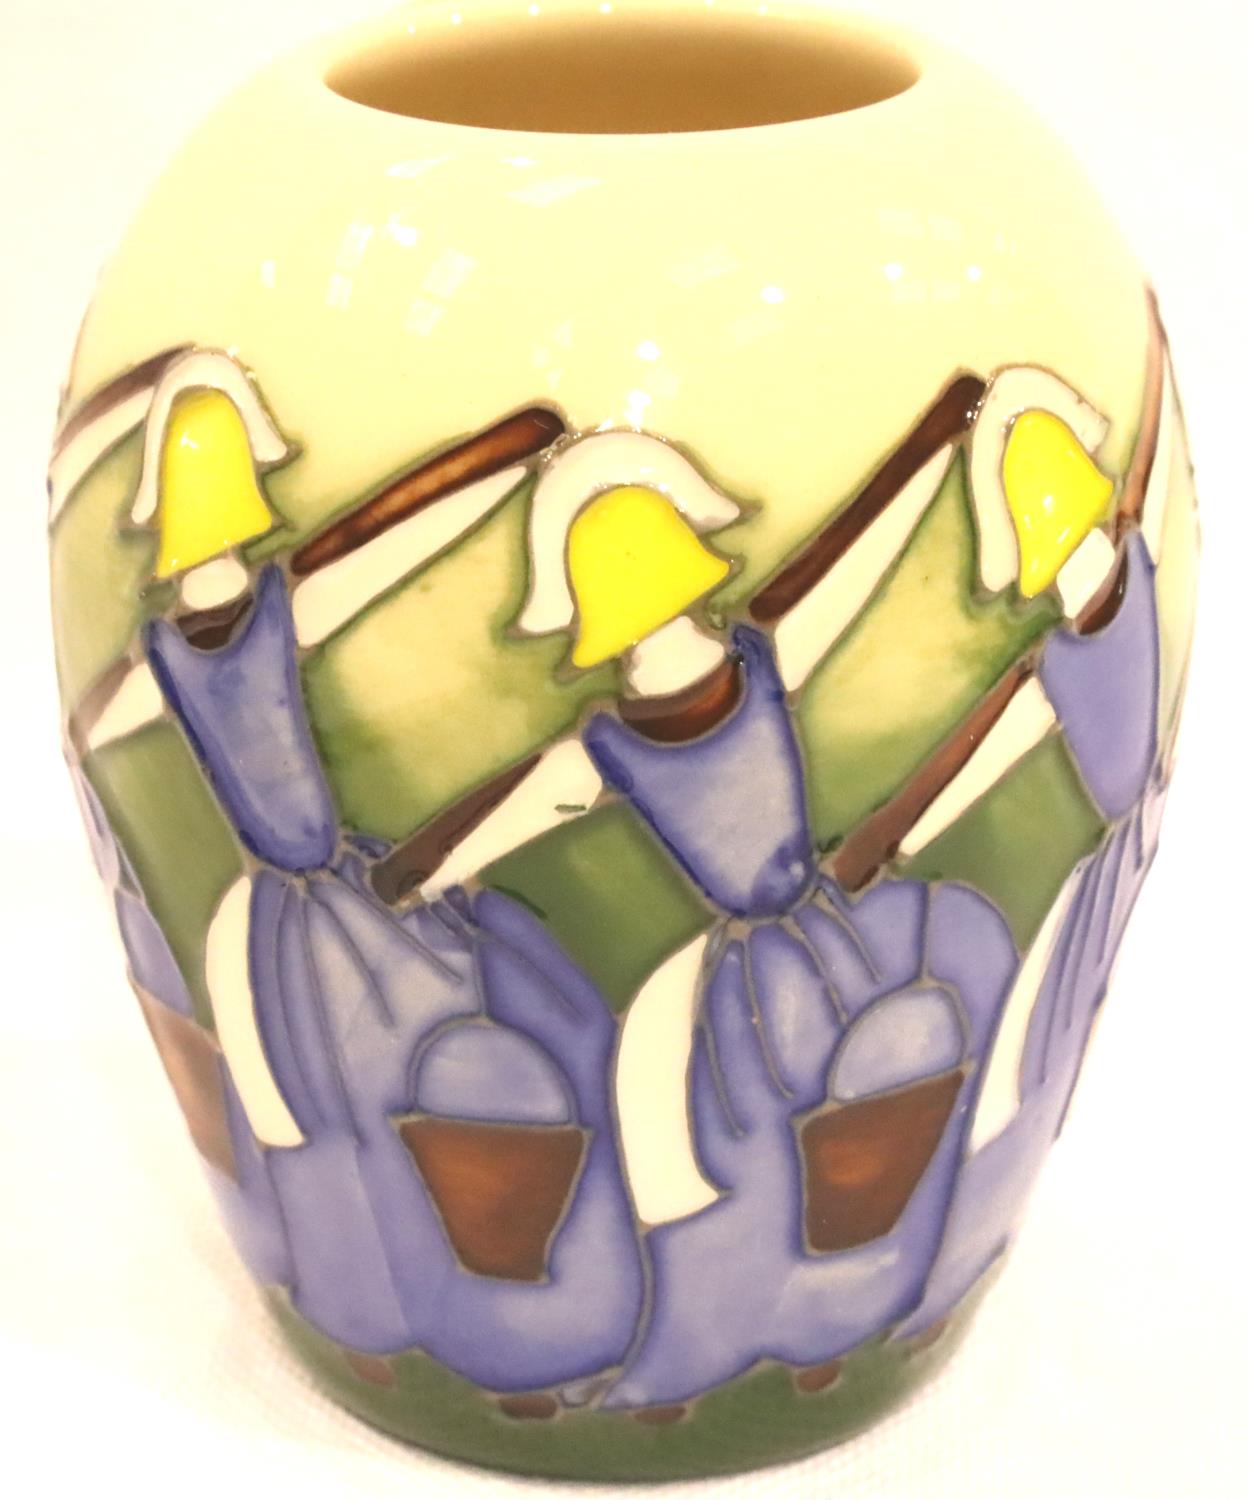 Moorcroft vase in the Eight Maids A Milking pattern, H: 7 cm. No cracks, chips or visible